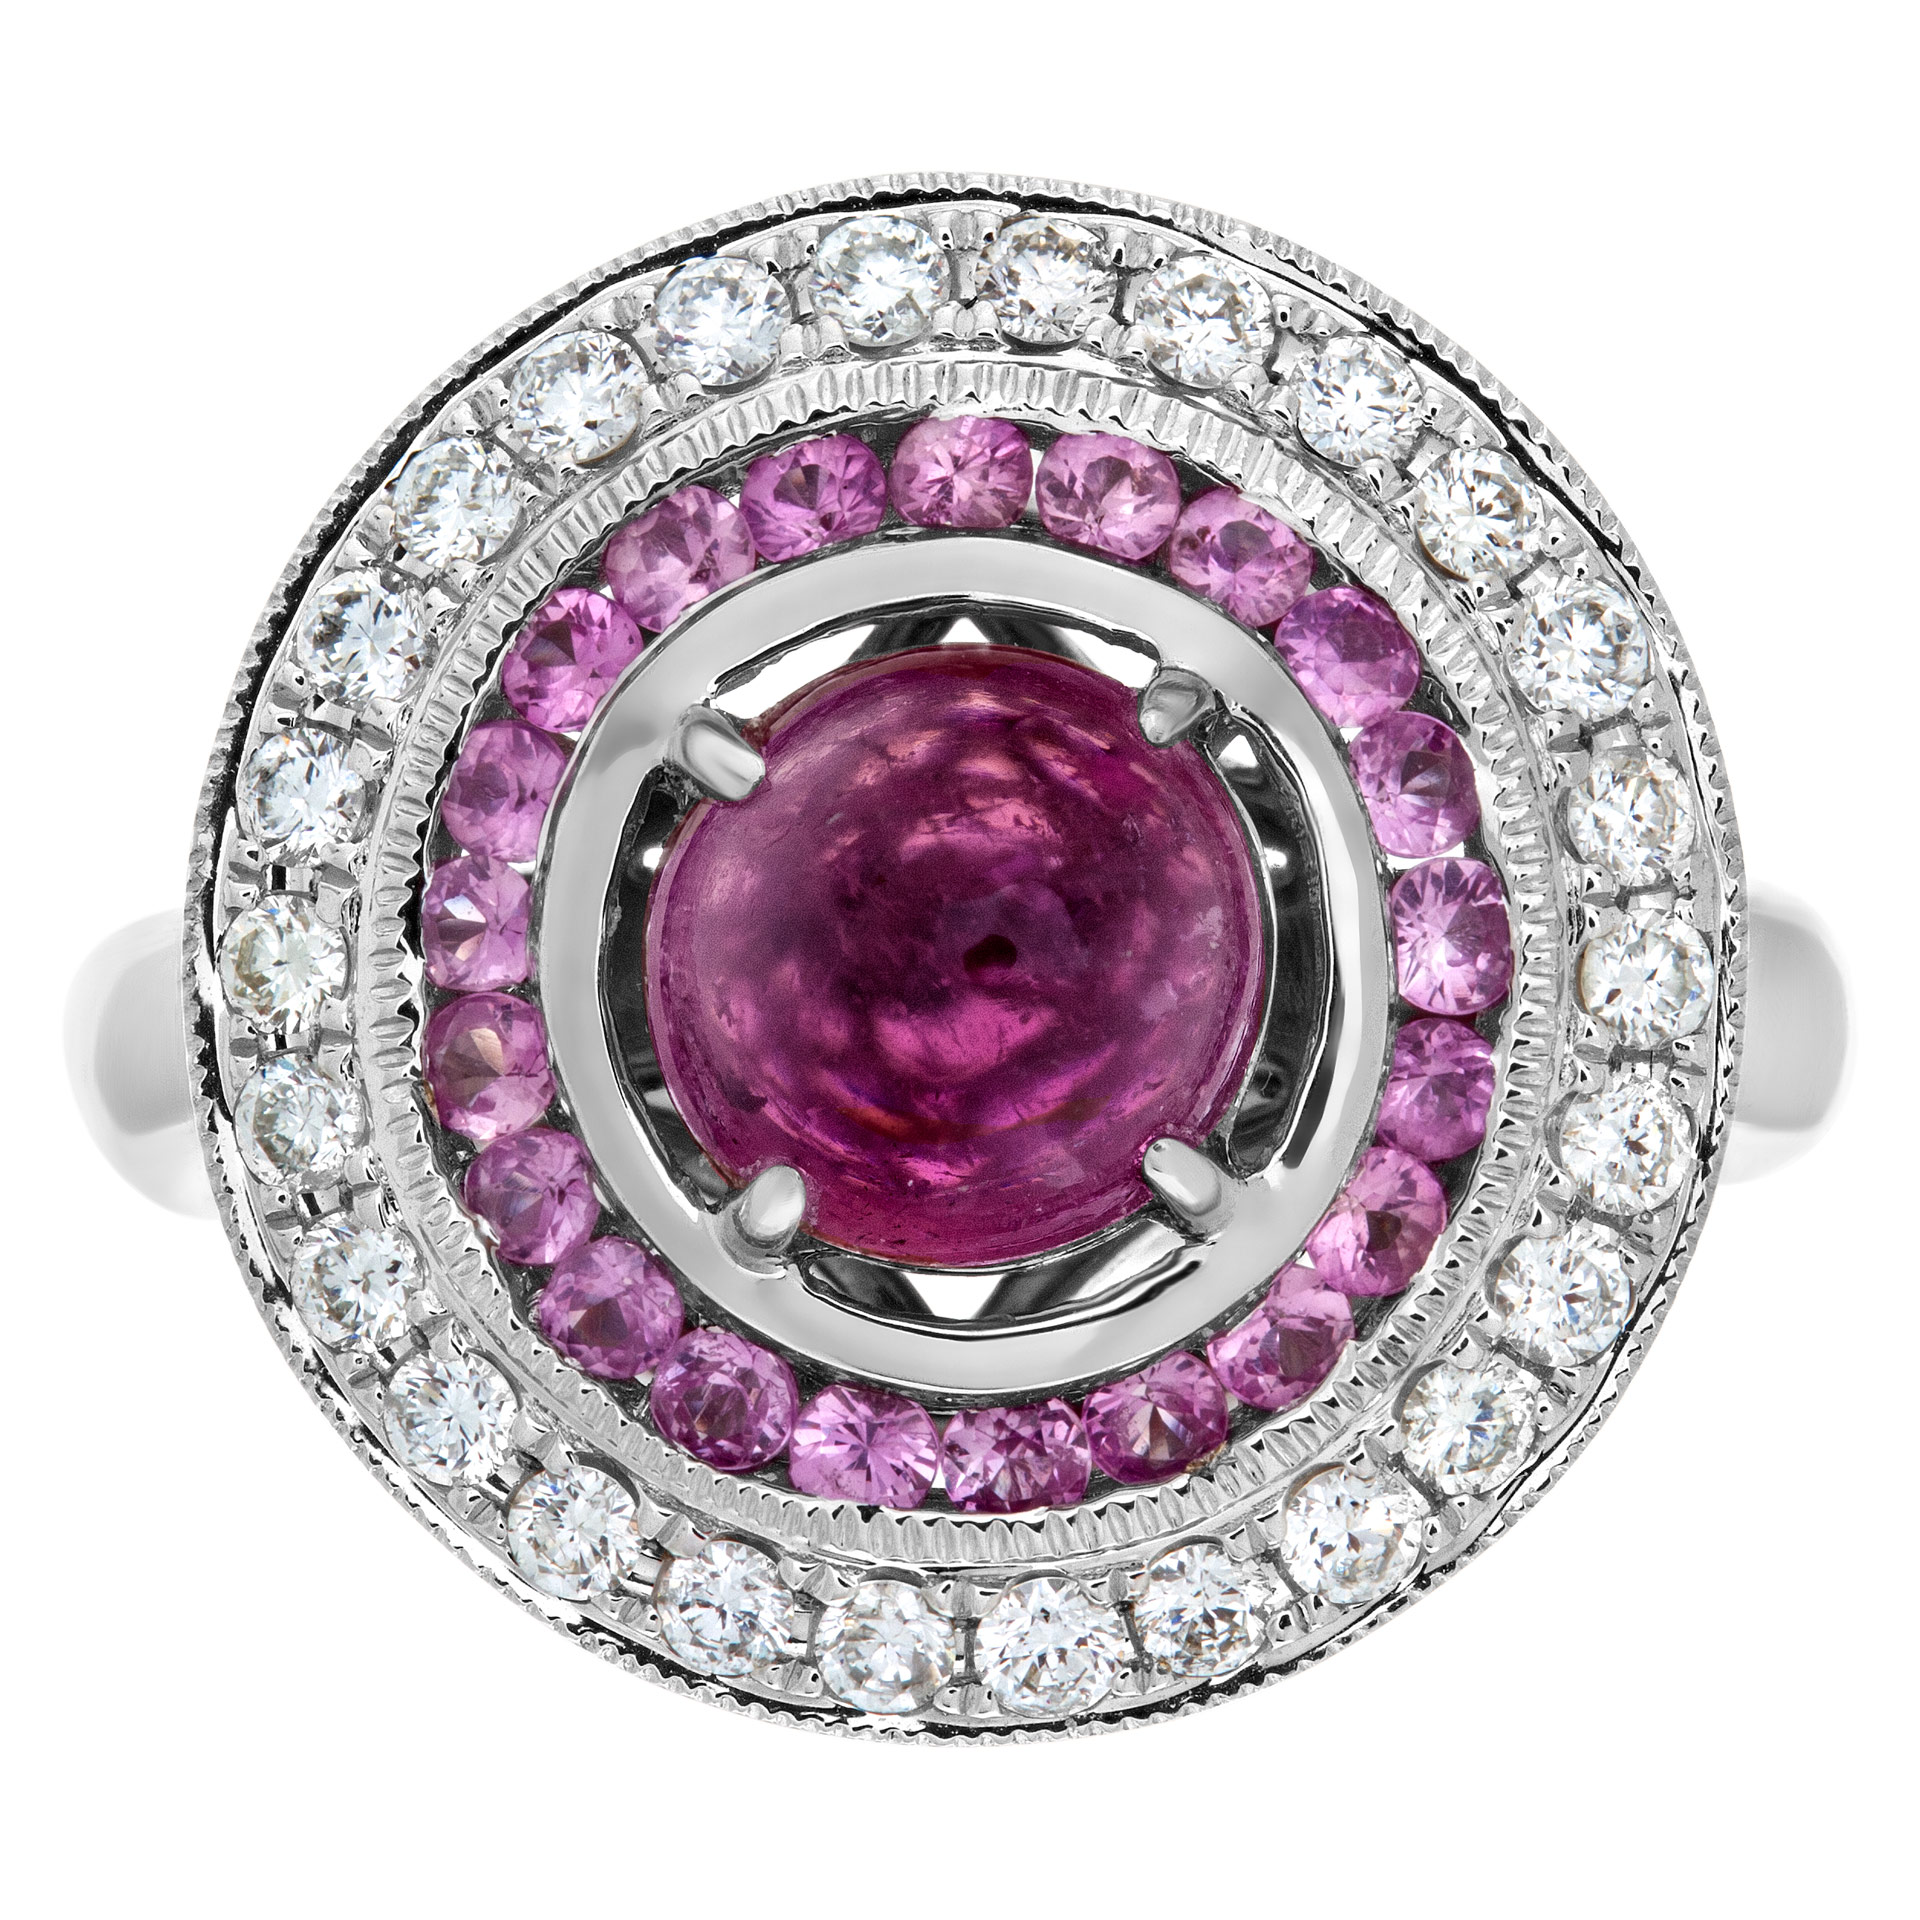 Diamond and pink sapphire ring in 18k white gold